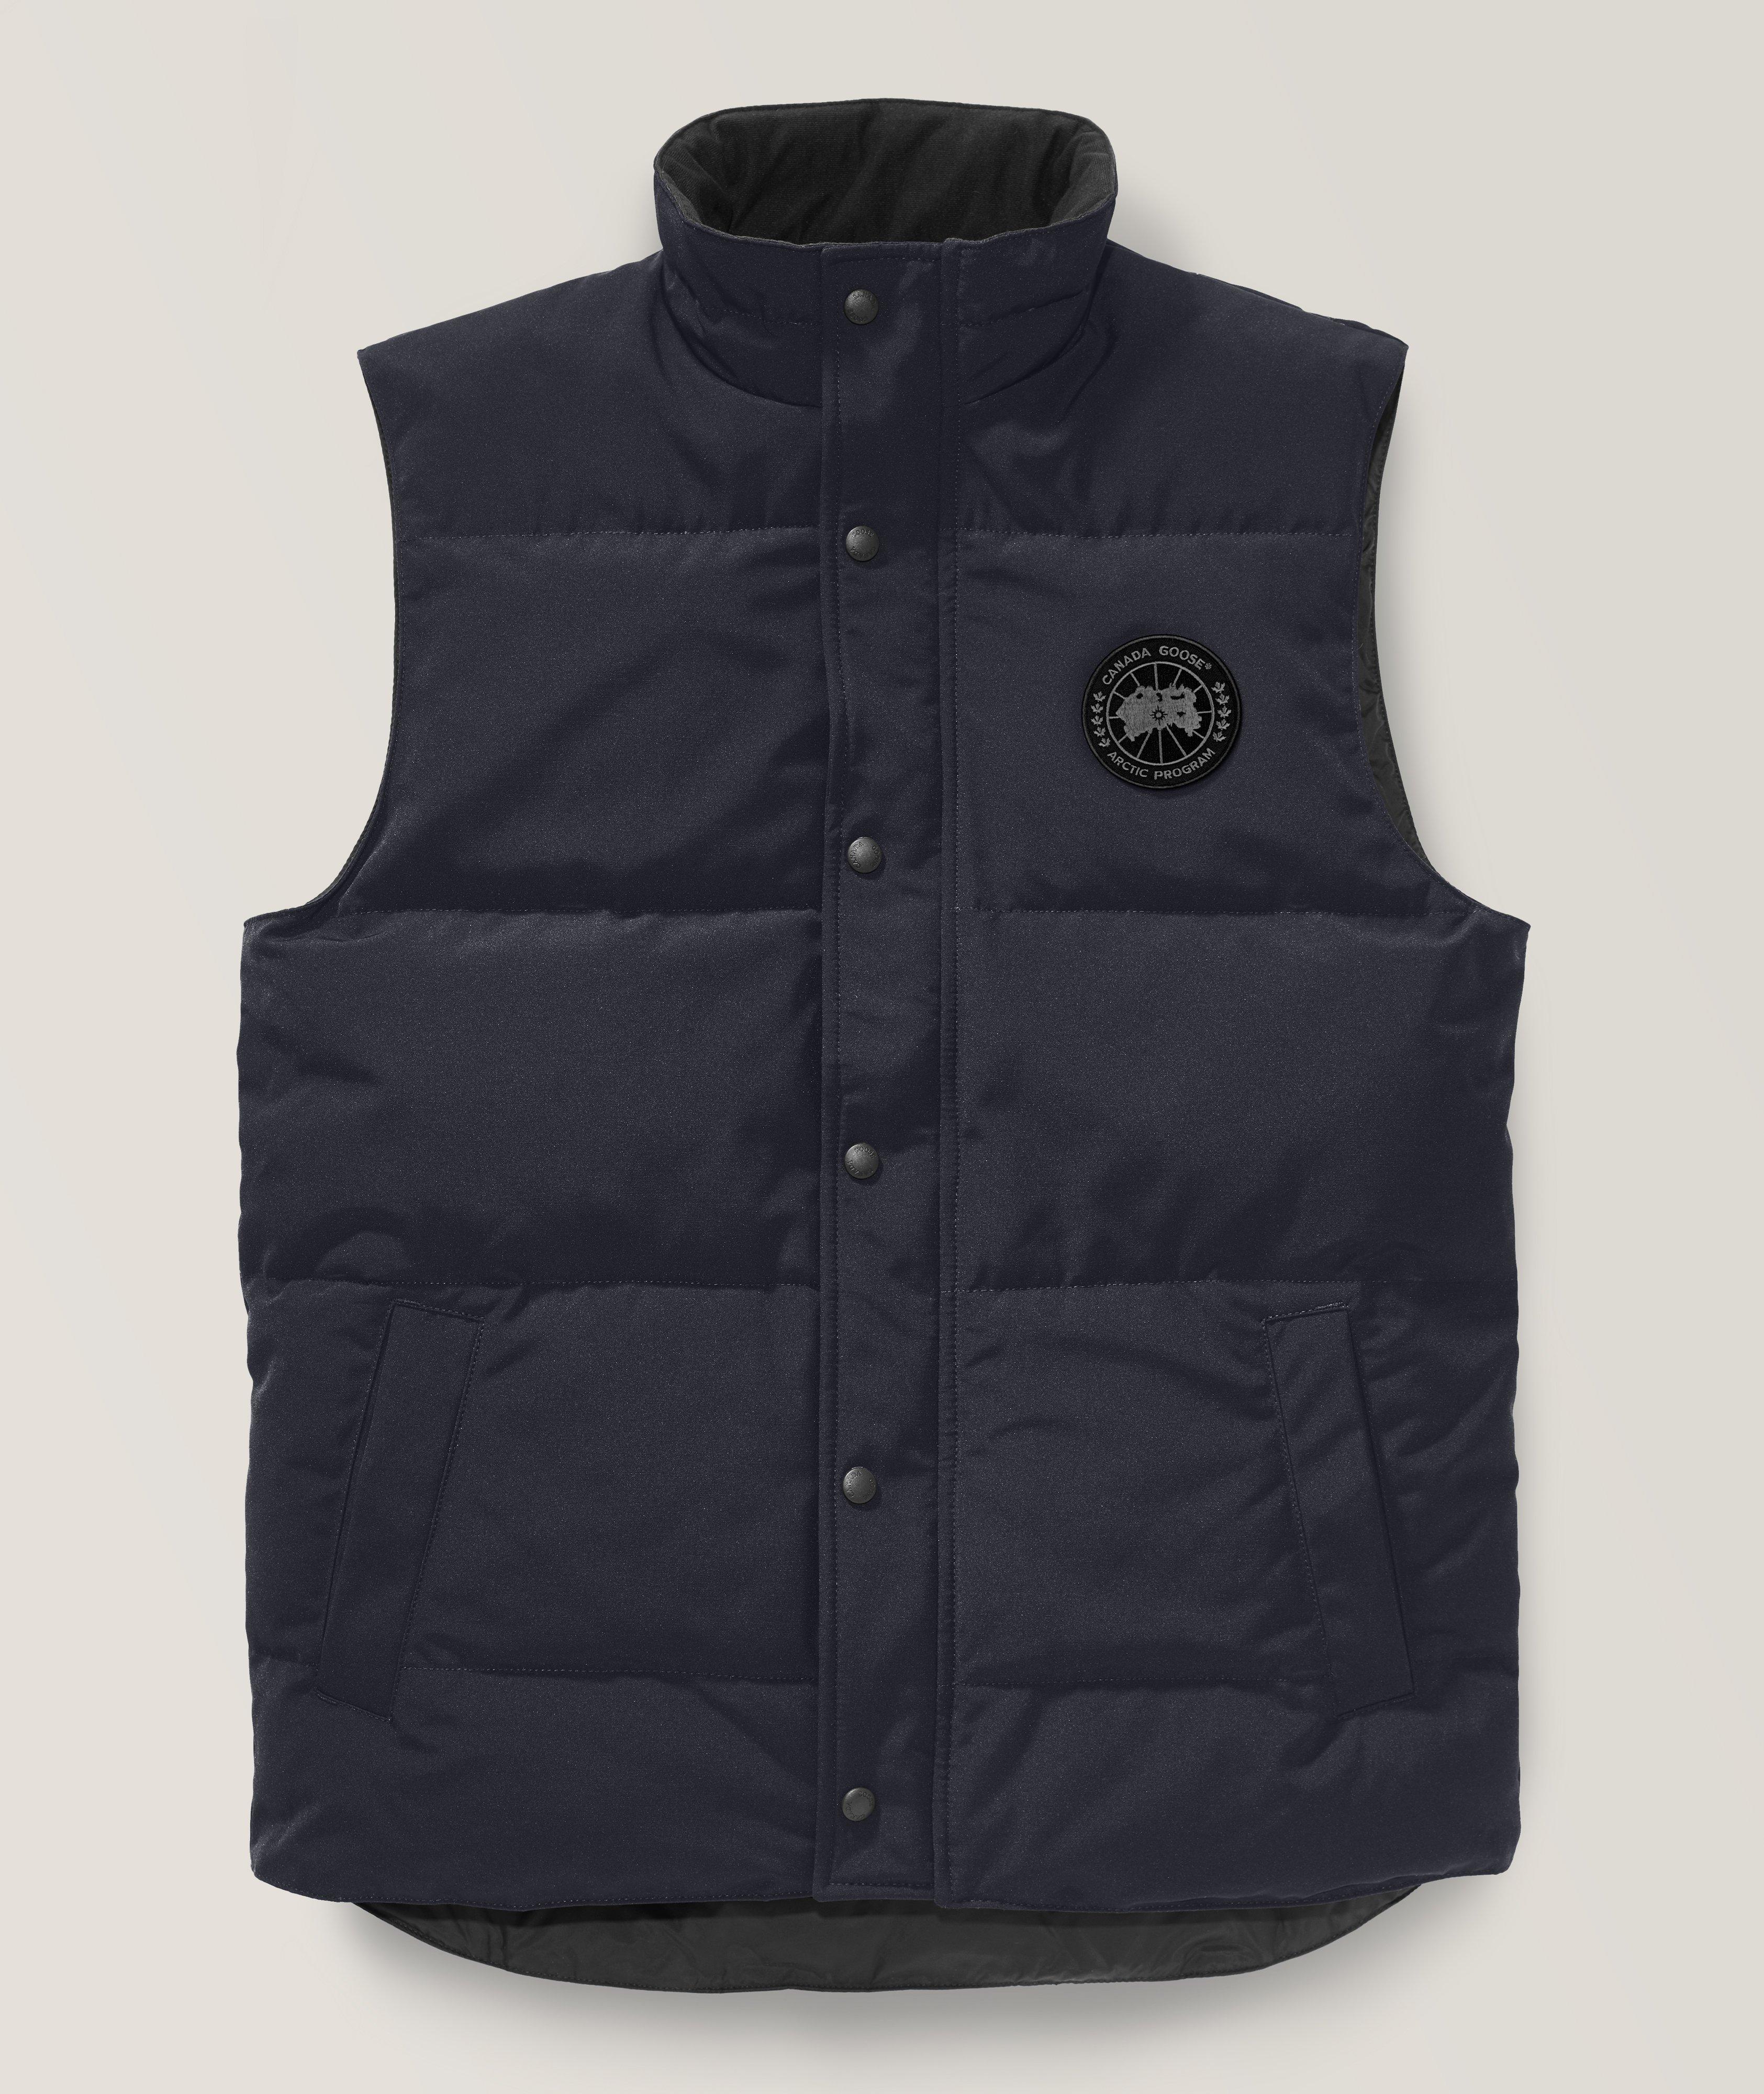 Freestyle Crew padded vest in blue - Canada Goose